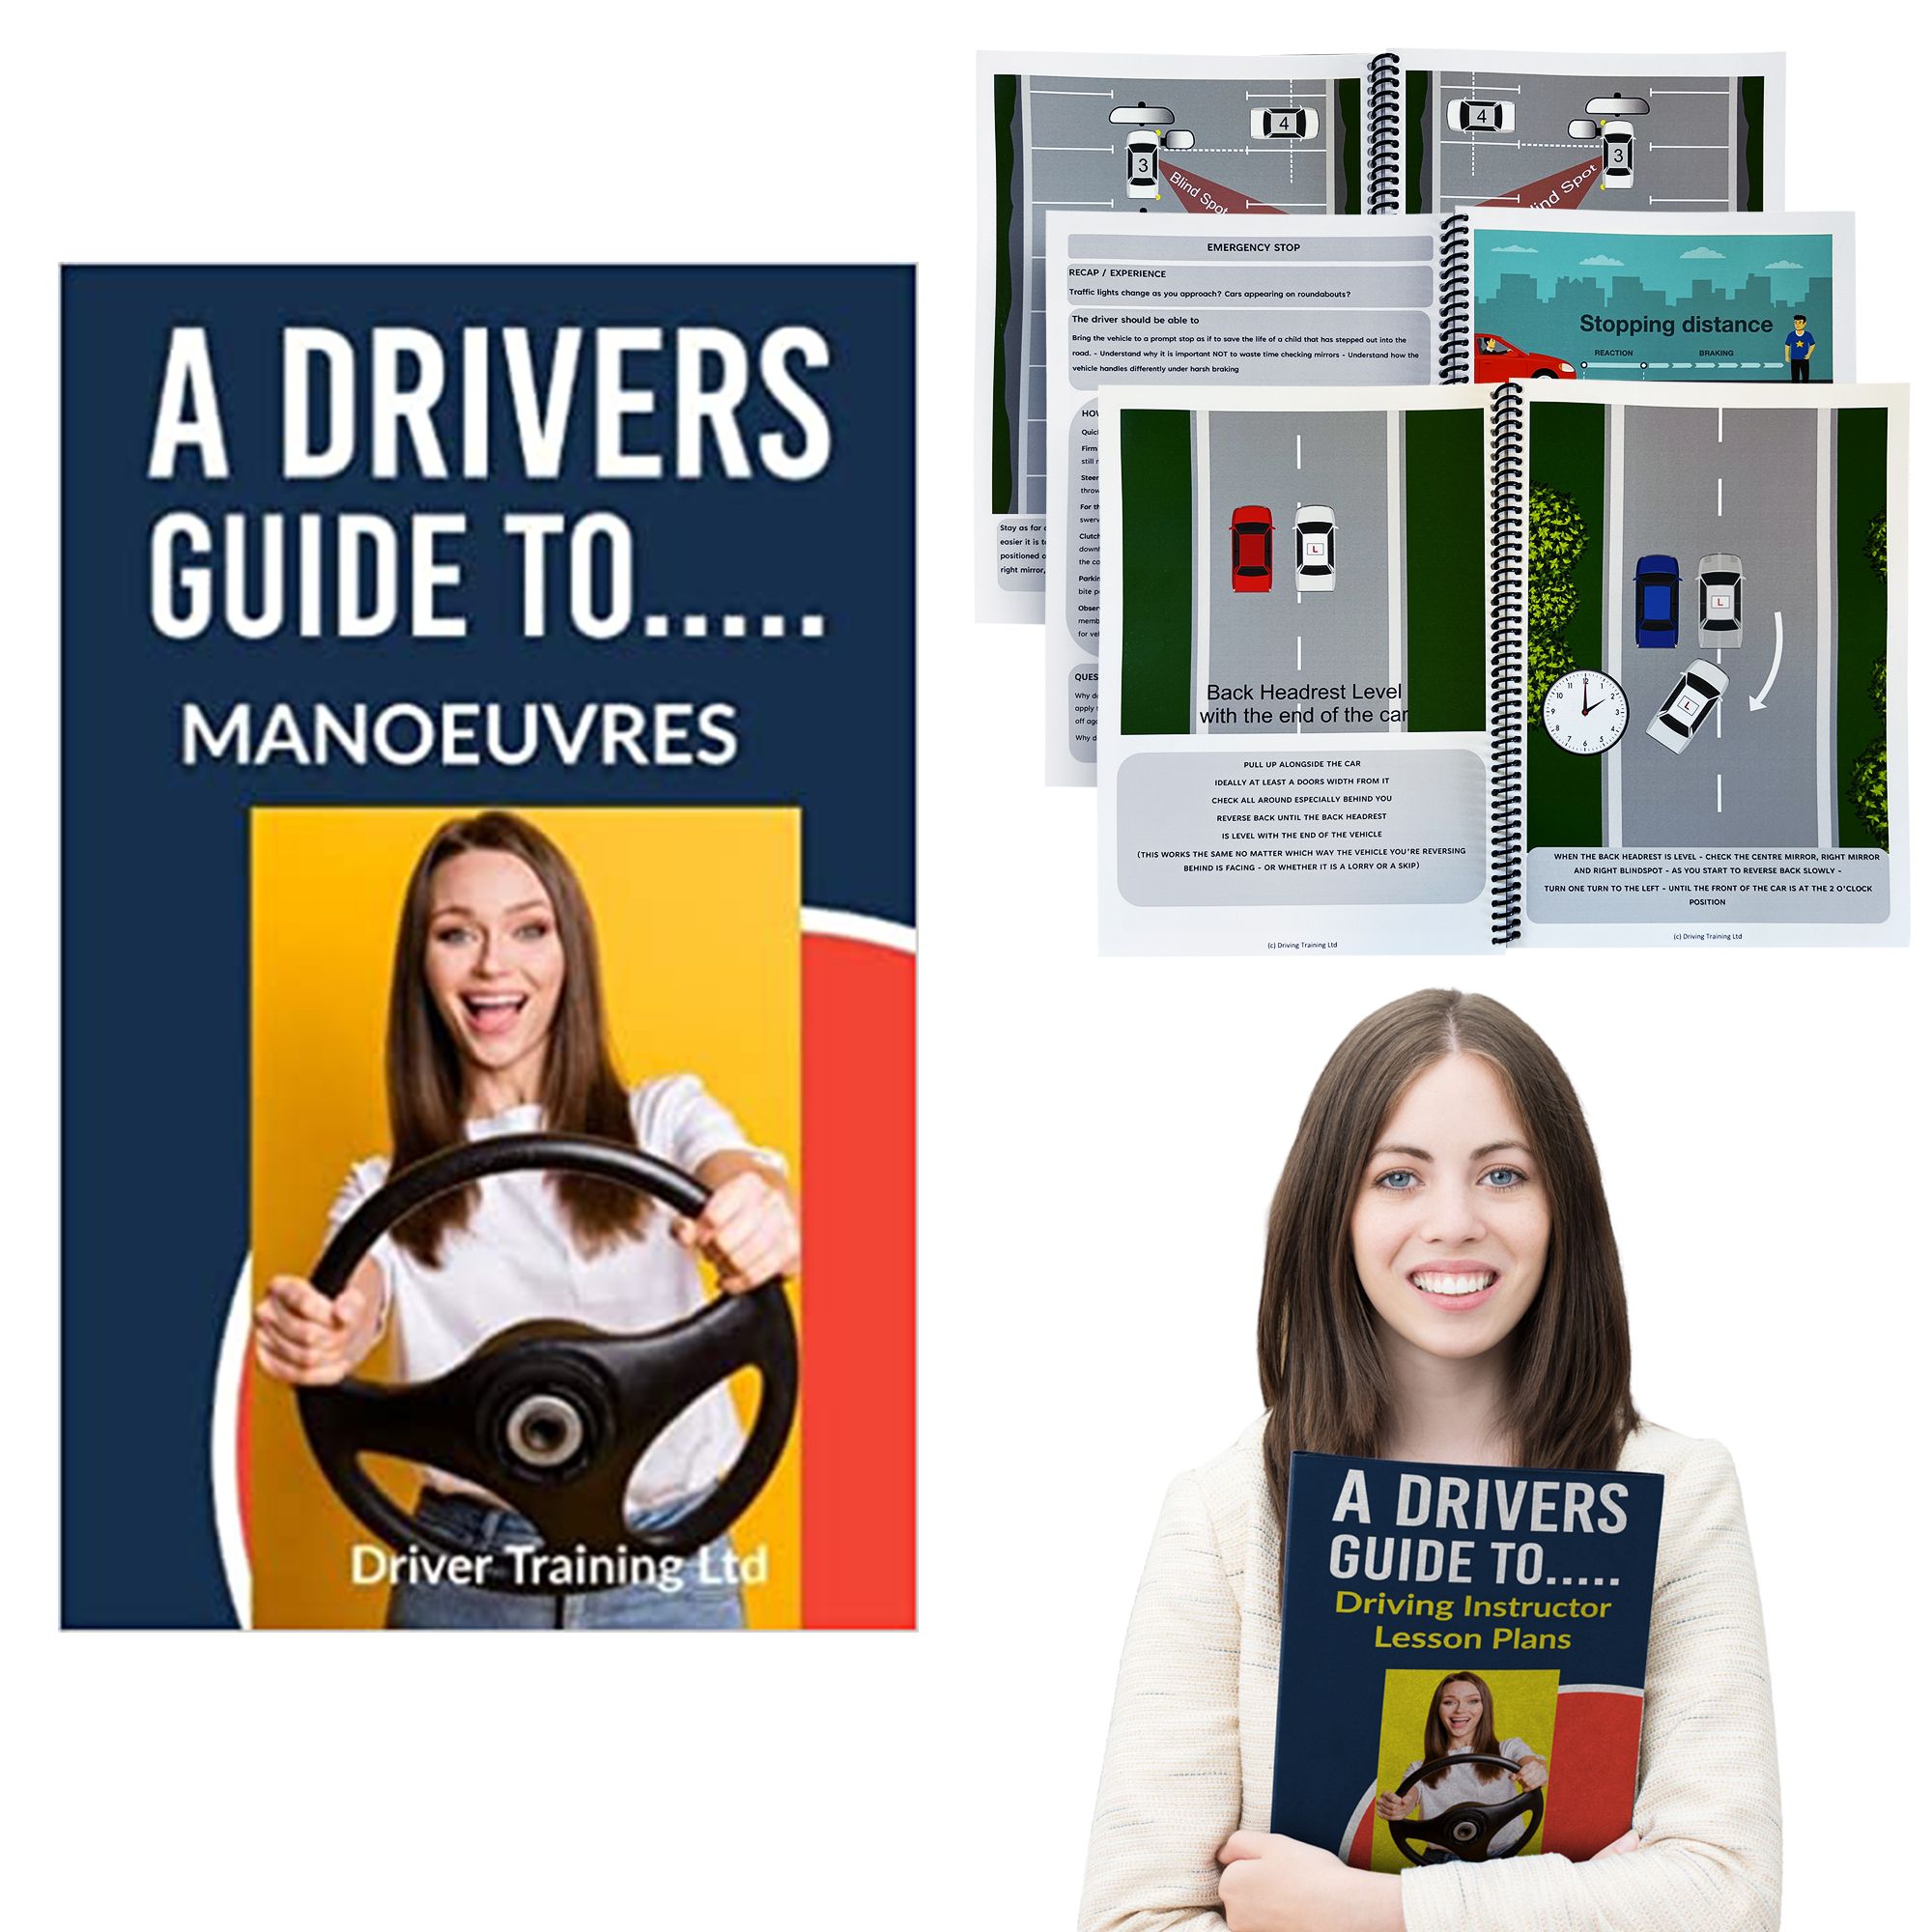 driving instructor lesson plans